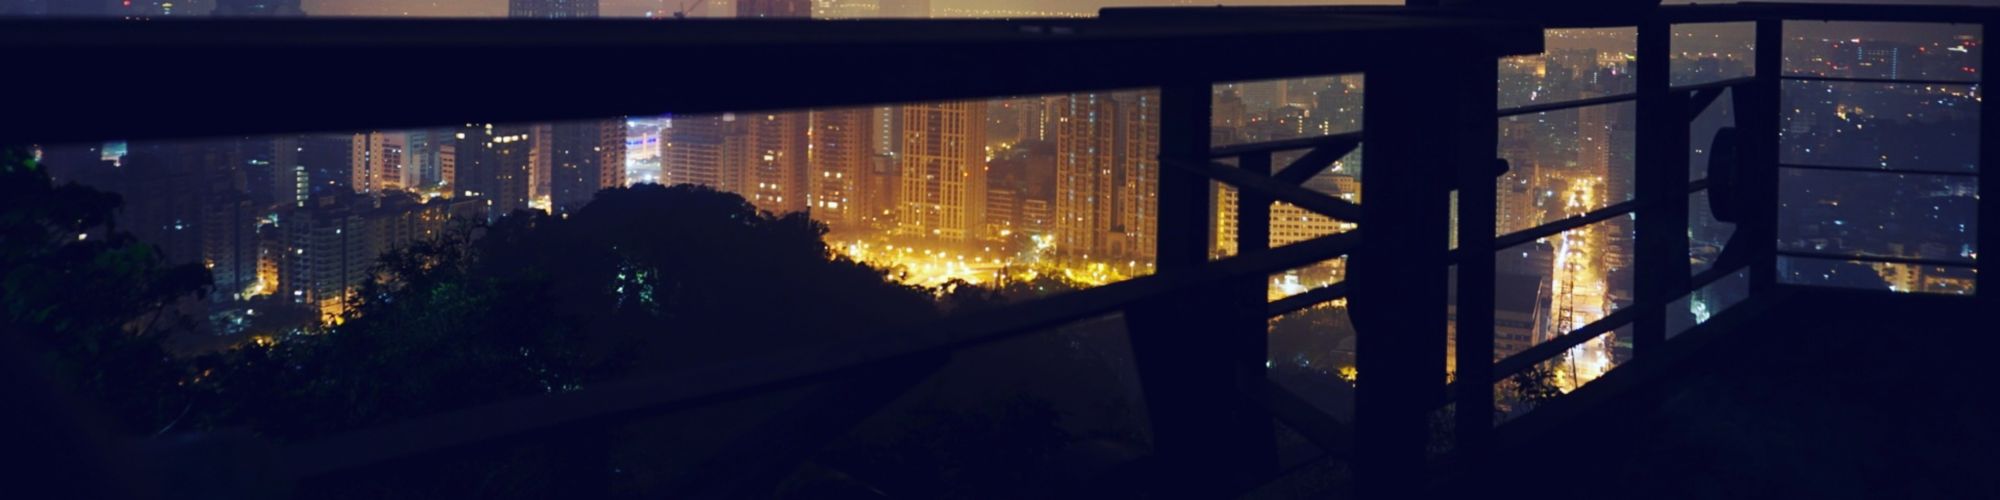 Man sitting on balcony railing and looking at city view